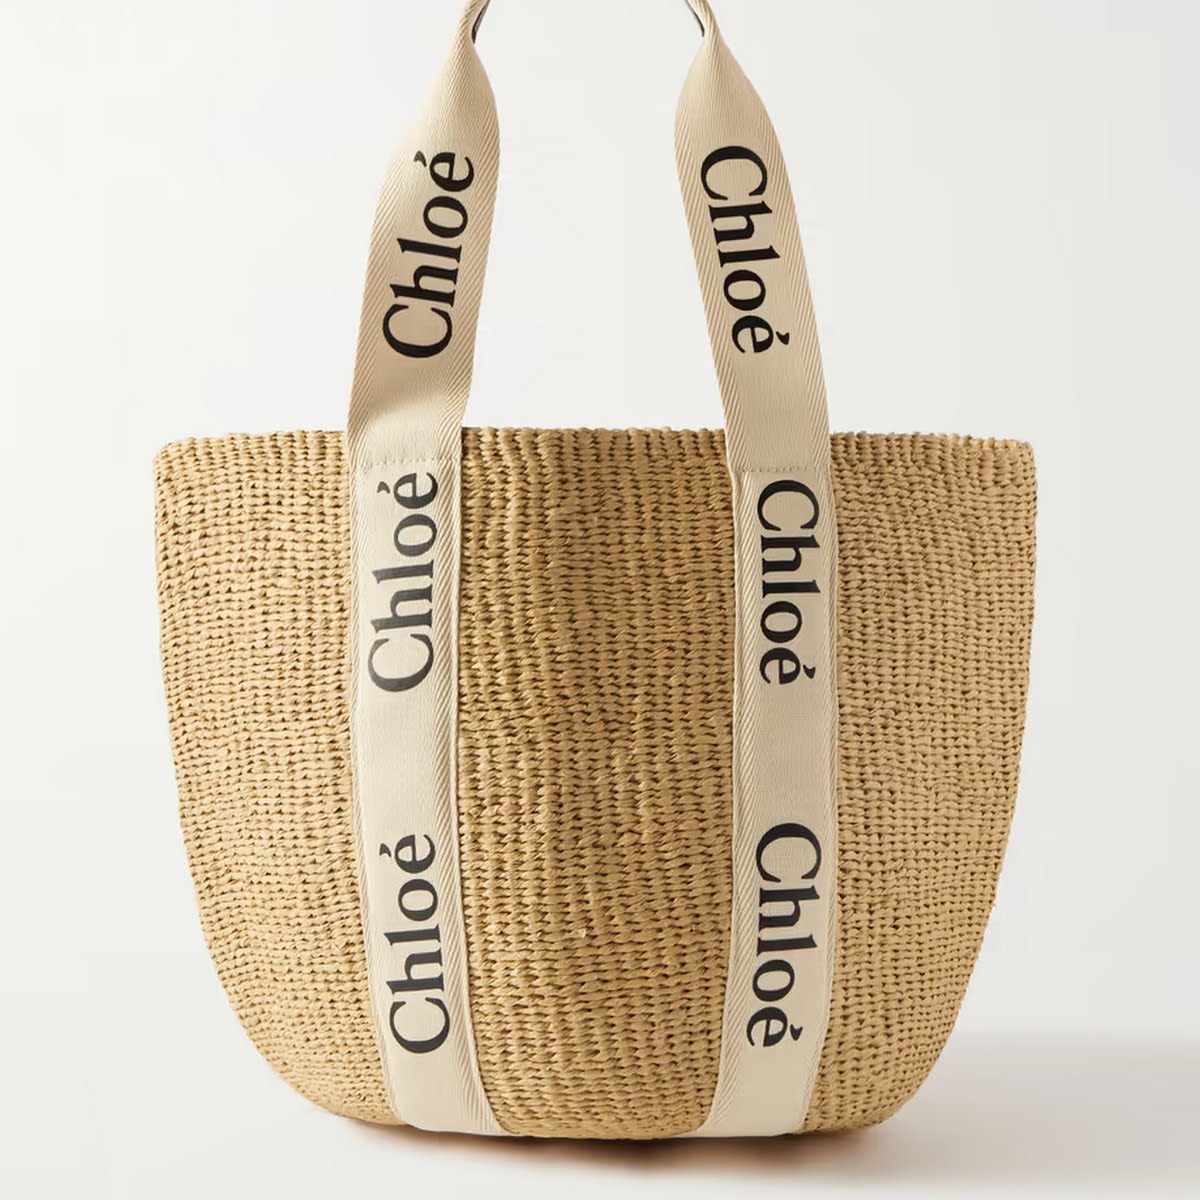 Chloé Woody Large Printed Leather-Trimmed Canvas and Raffia Tote, €575, Net-a-porter